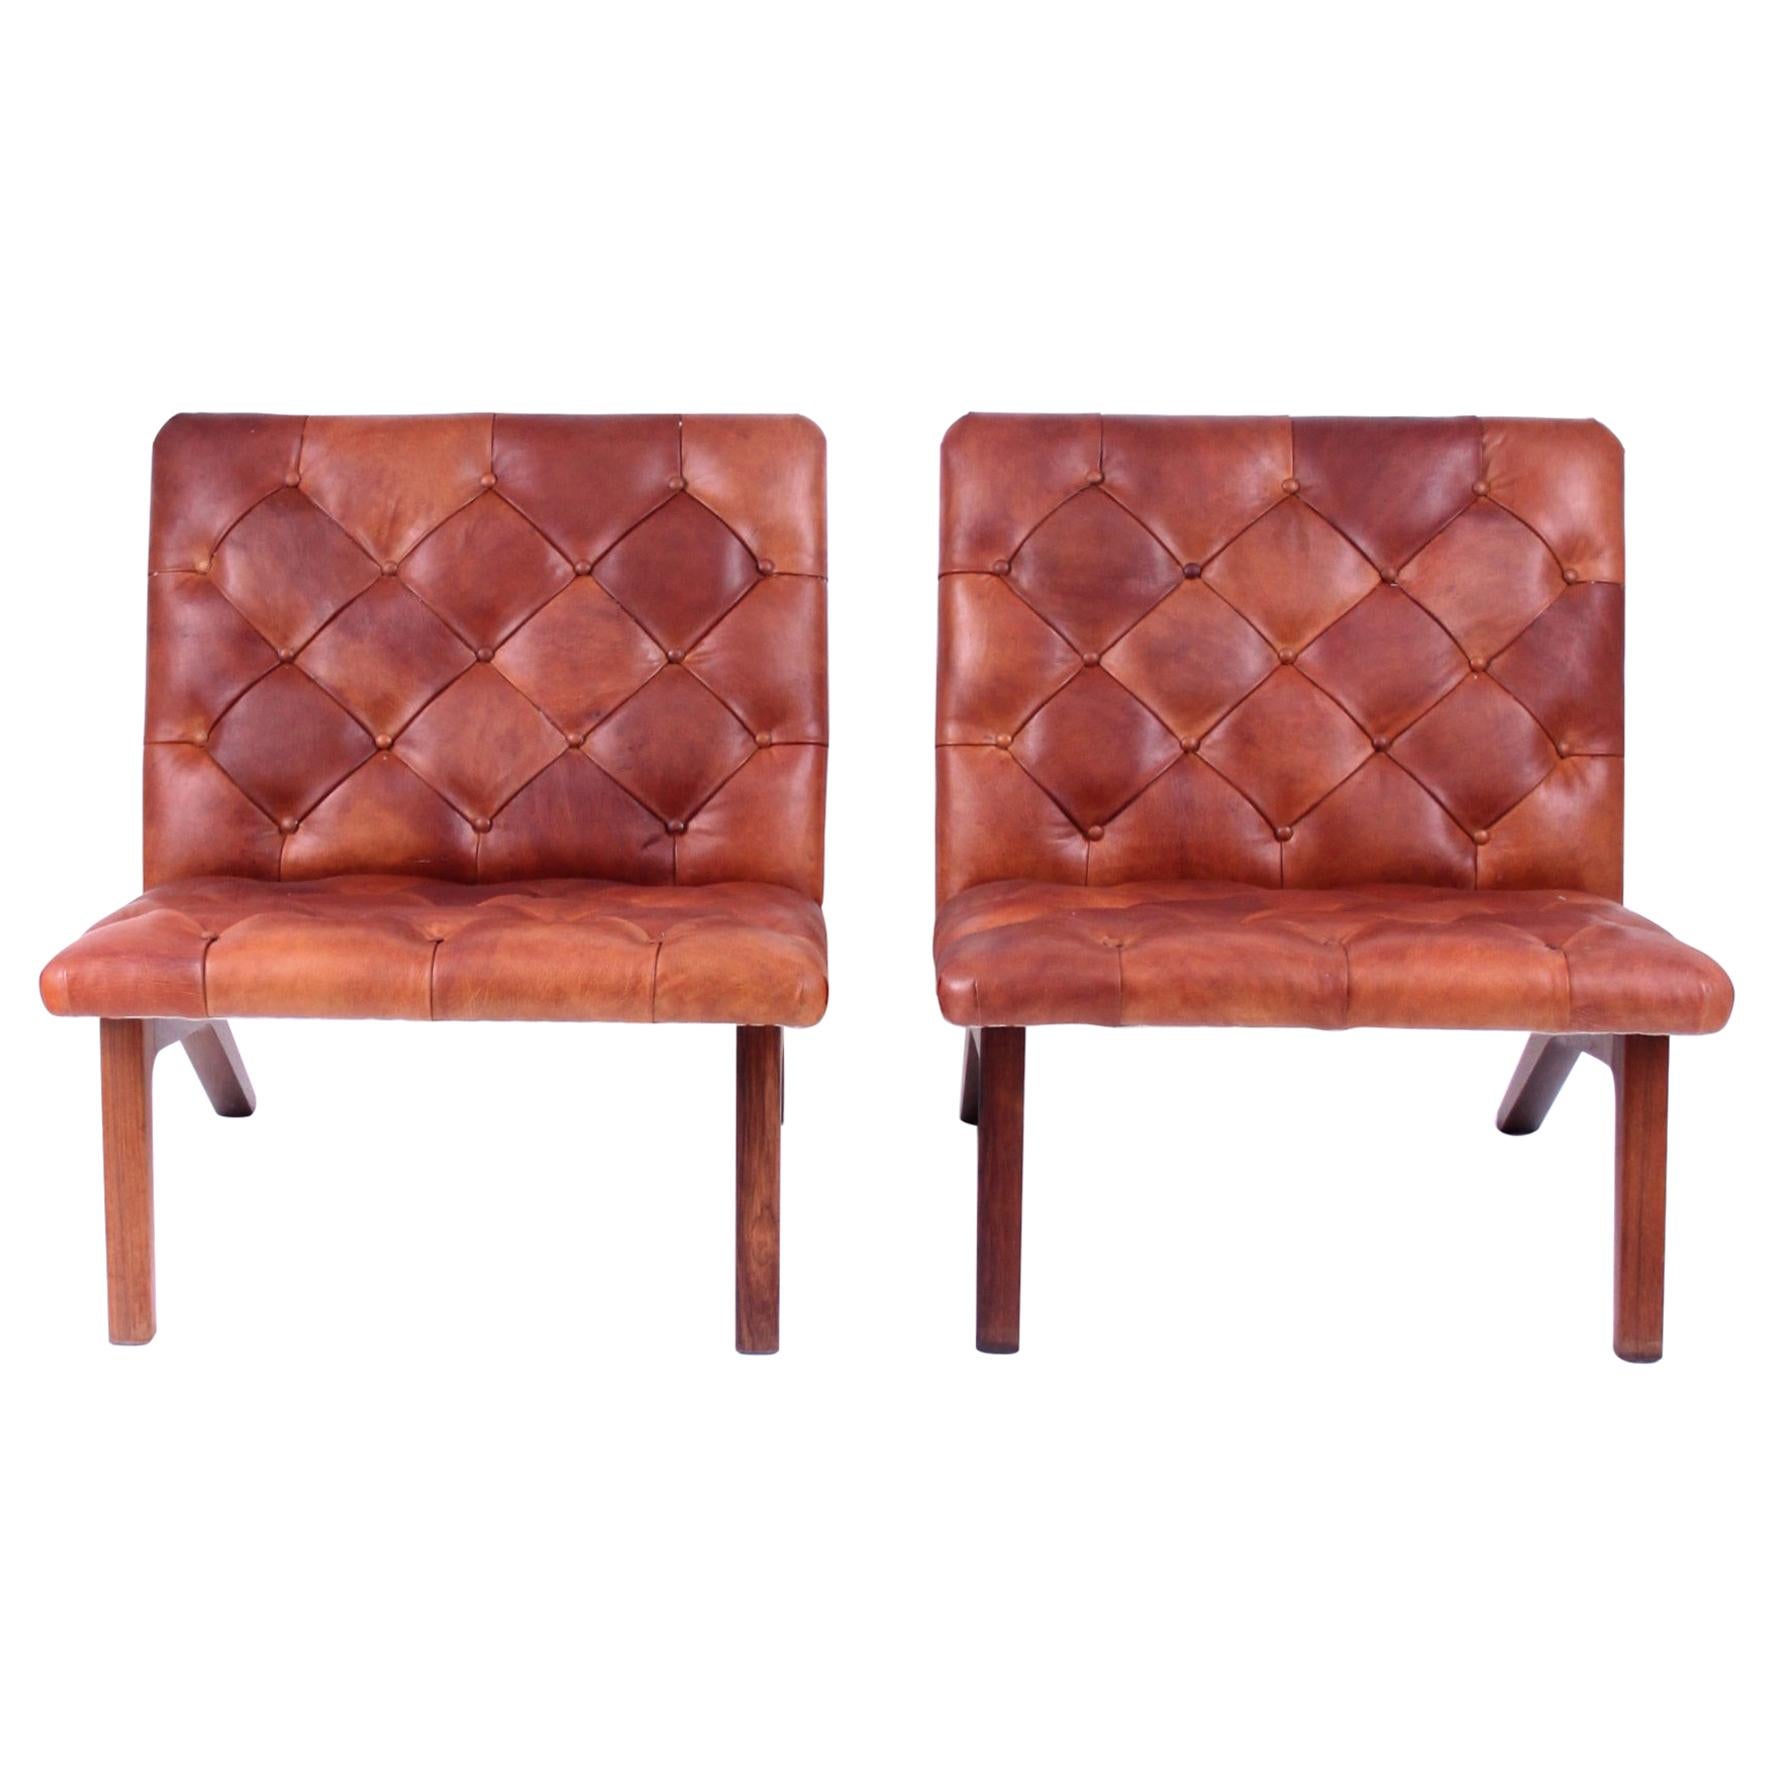 Pair of Lounge Chairs, Helge Vestergaard Jensen, Rosewood and Niger Leather 1966